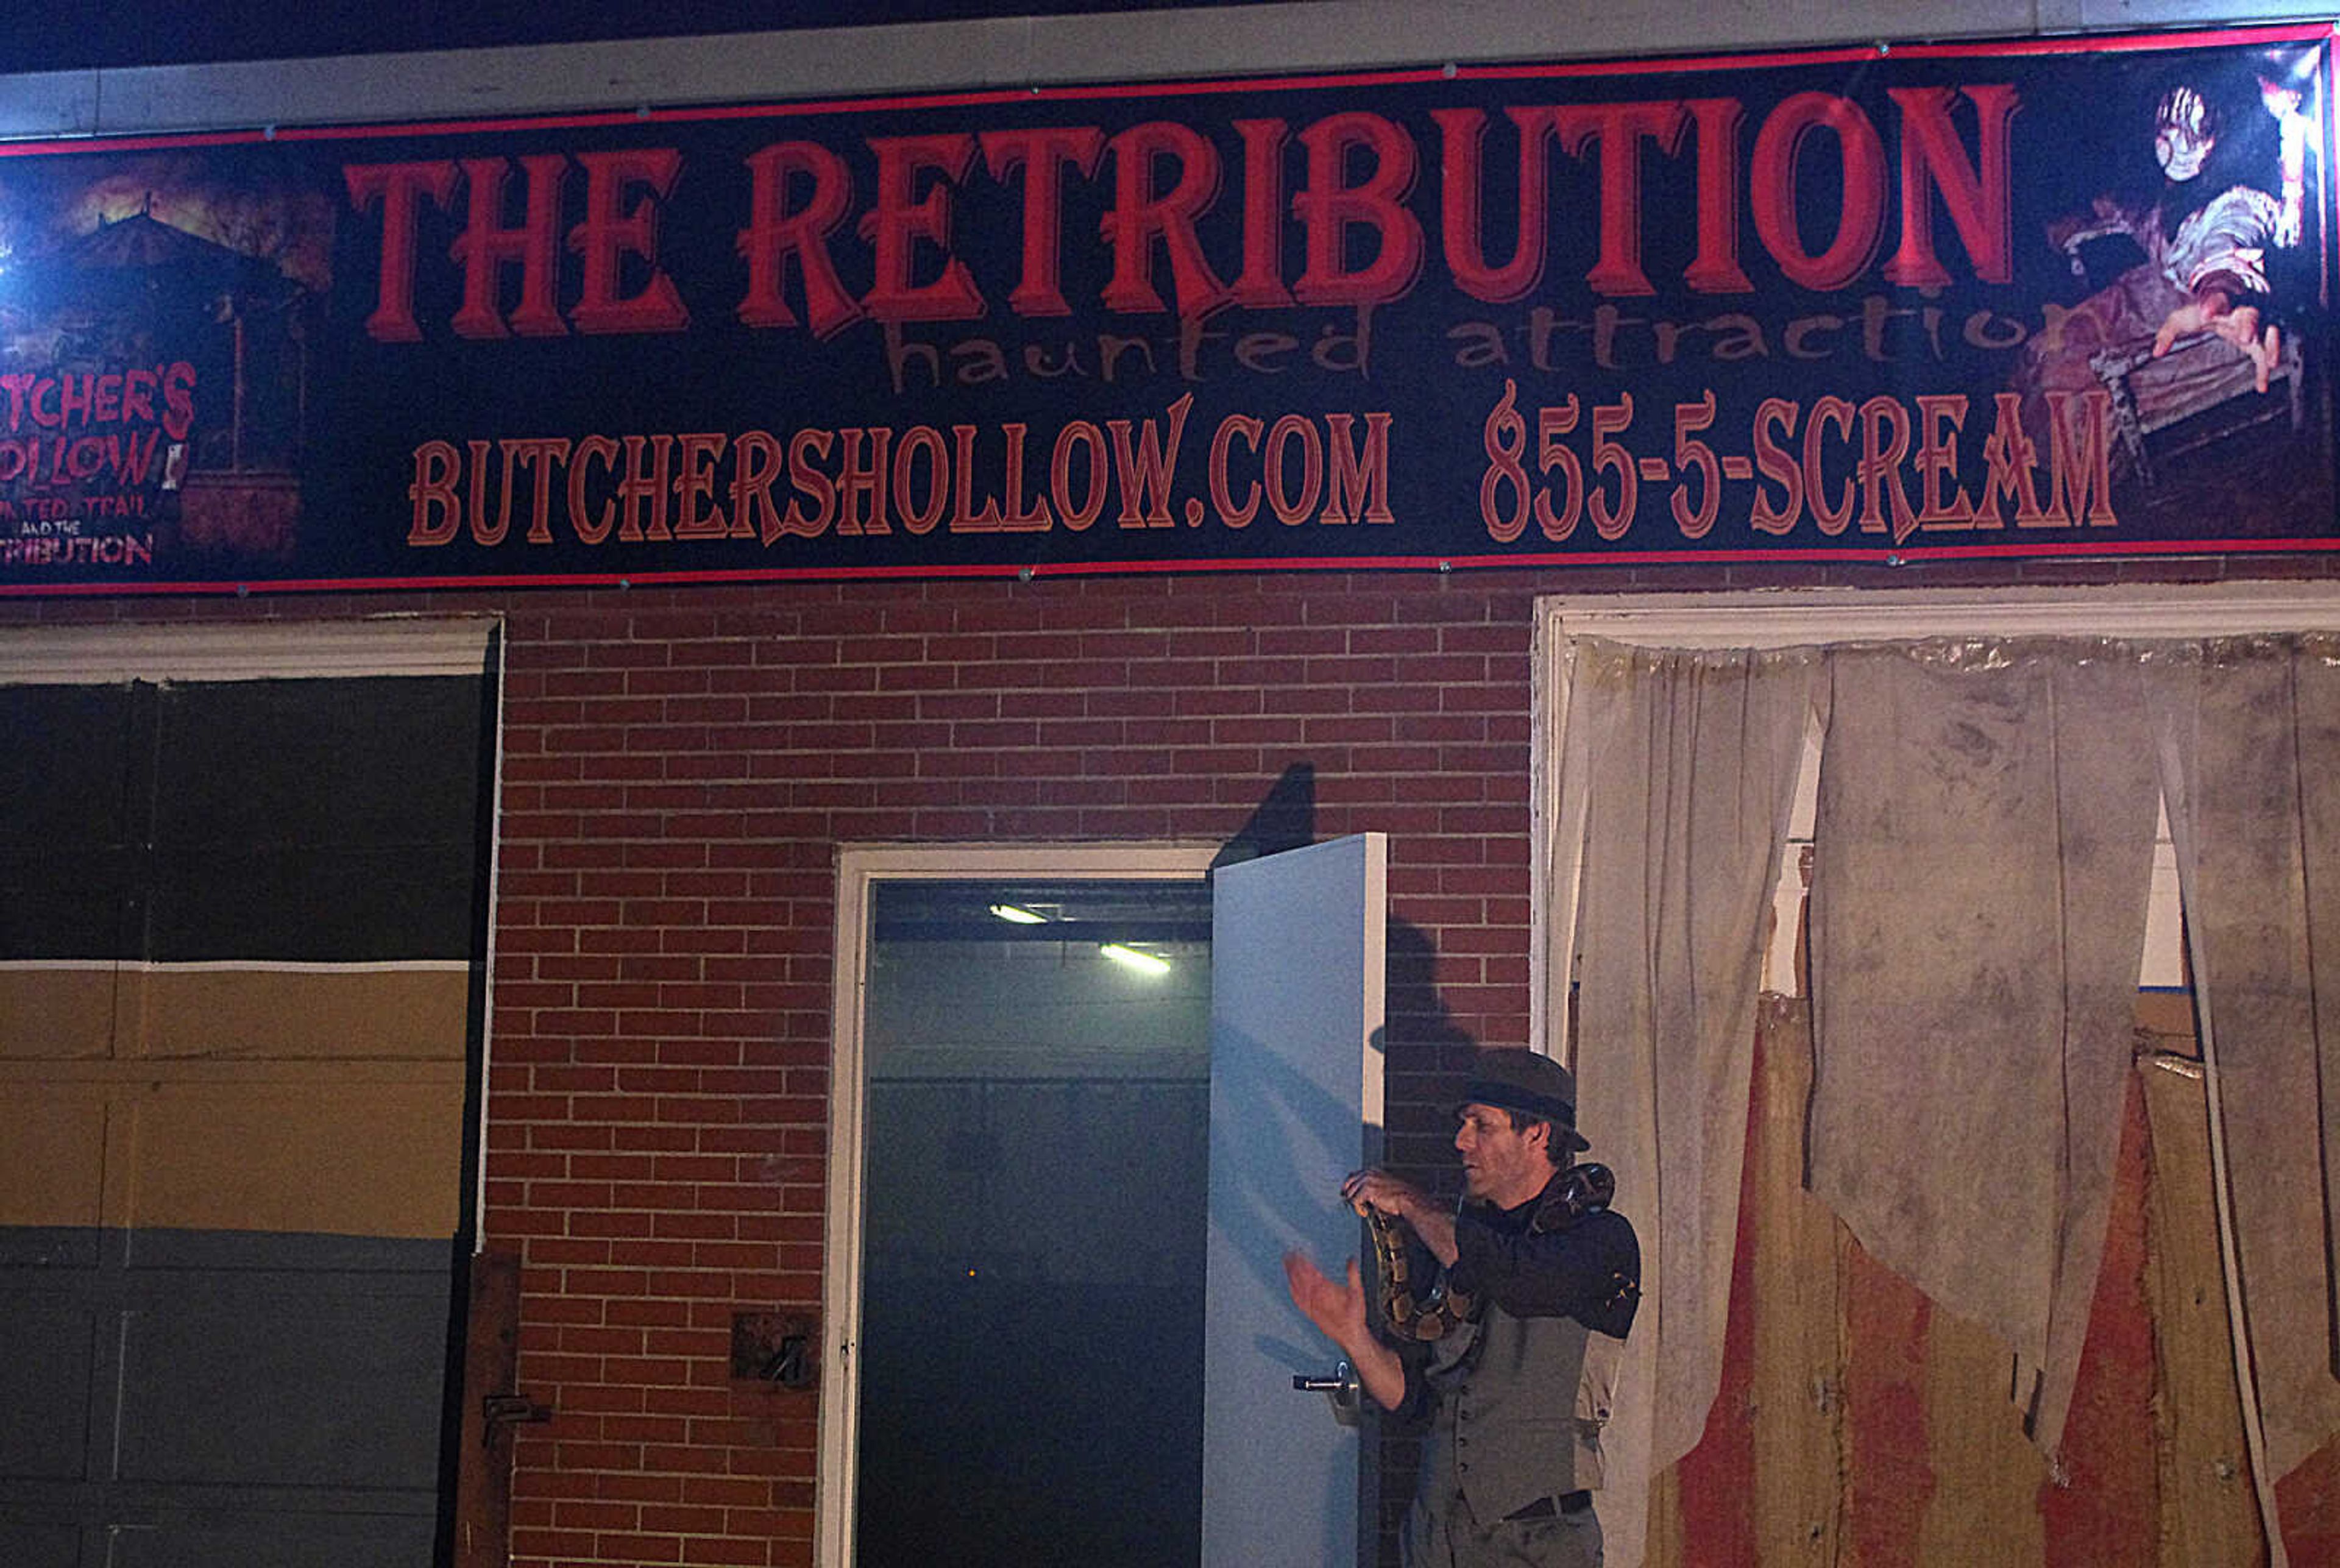 Butcher's Hollow Haunted Trail presents The Retribution